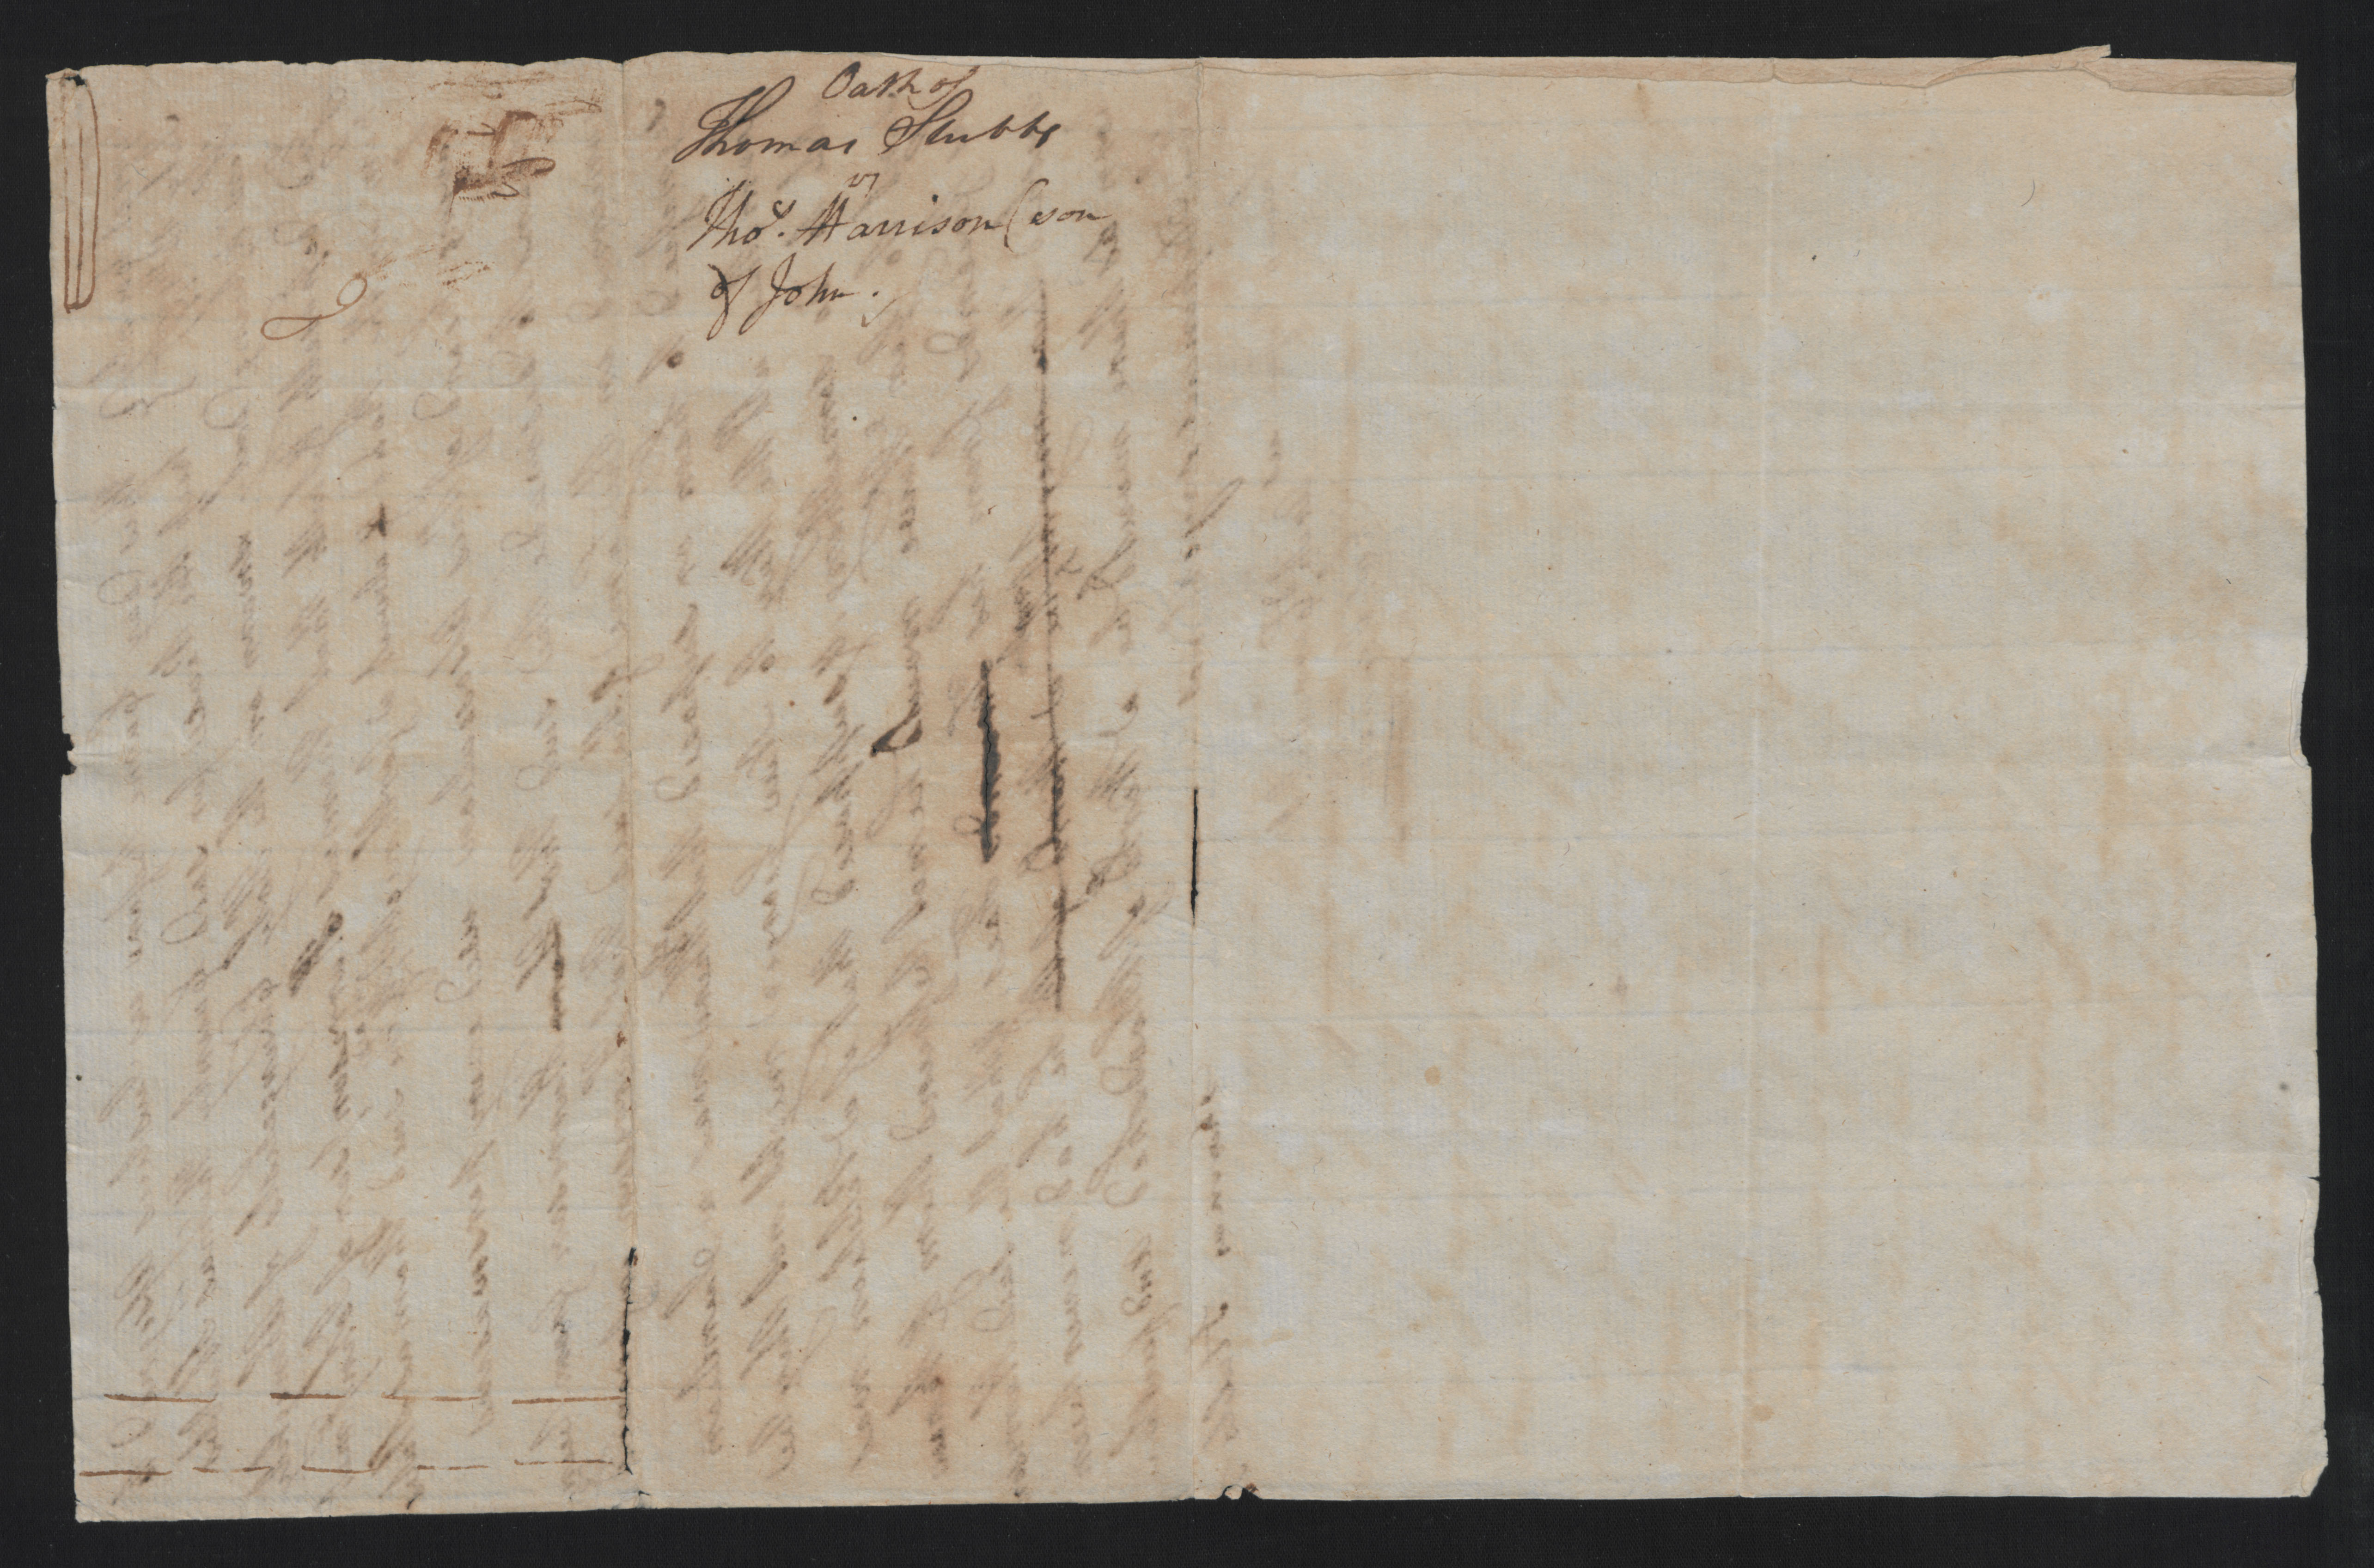 Deposition of Thomas Stubbs Sr., 14 July 1777, page 2